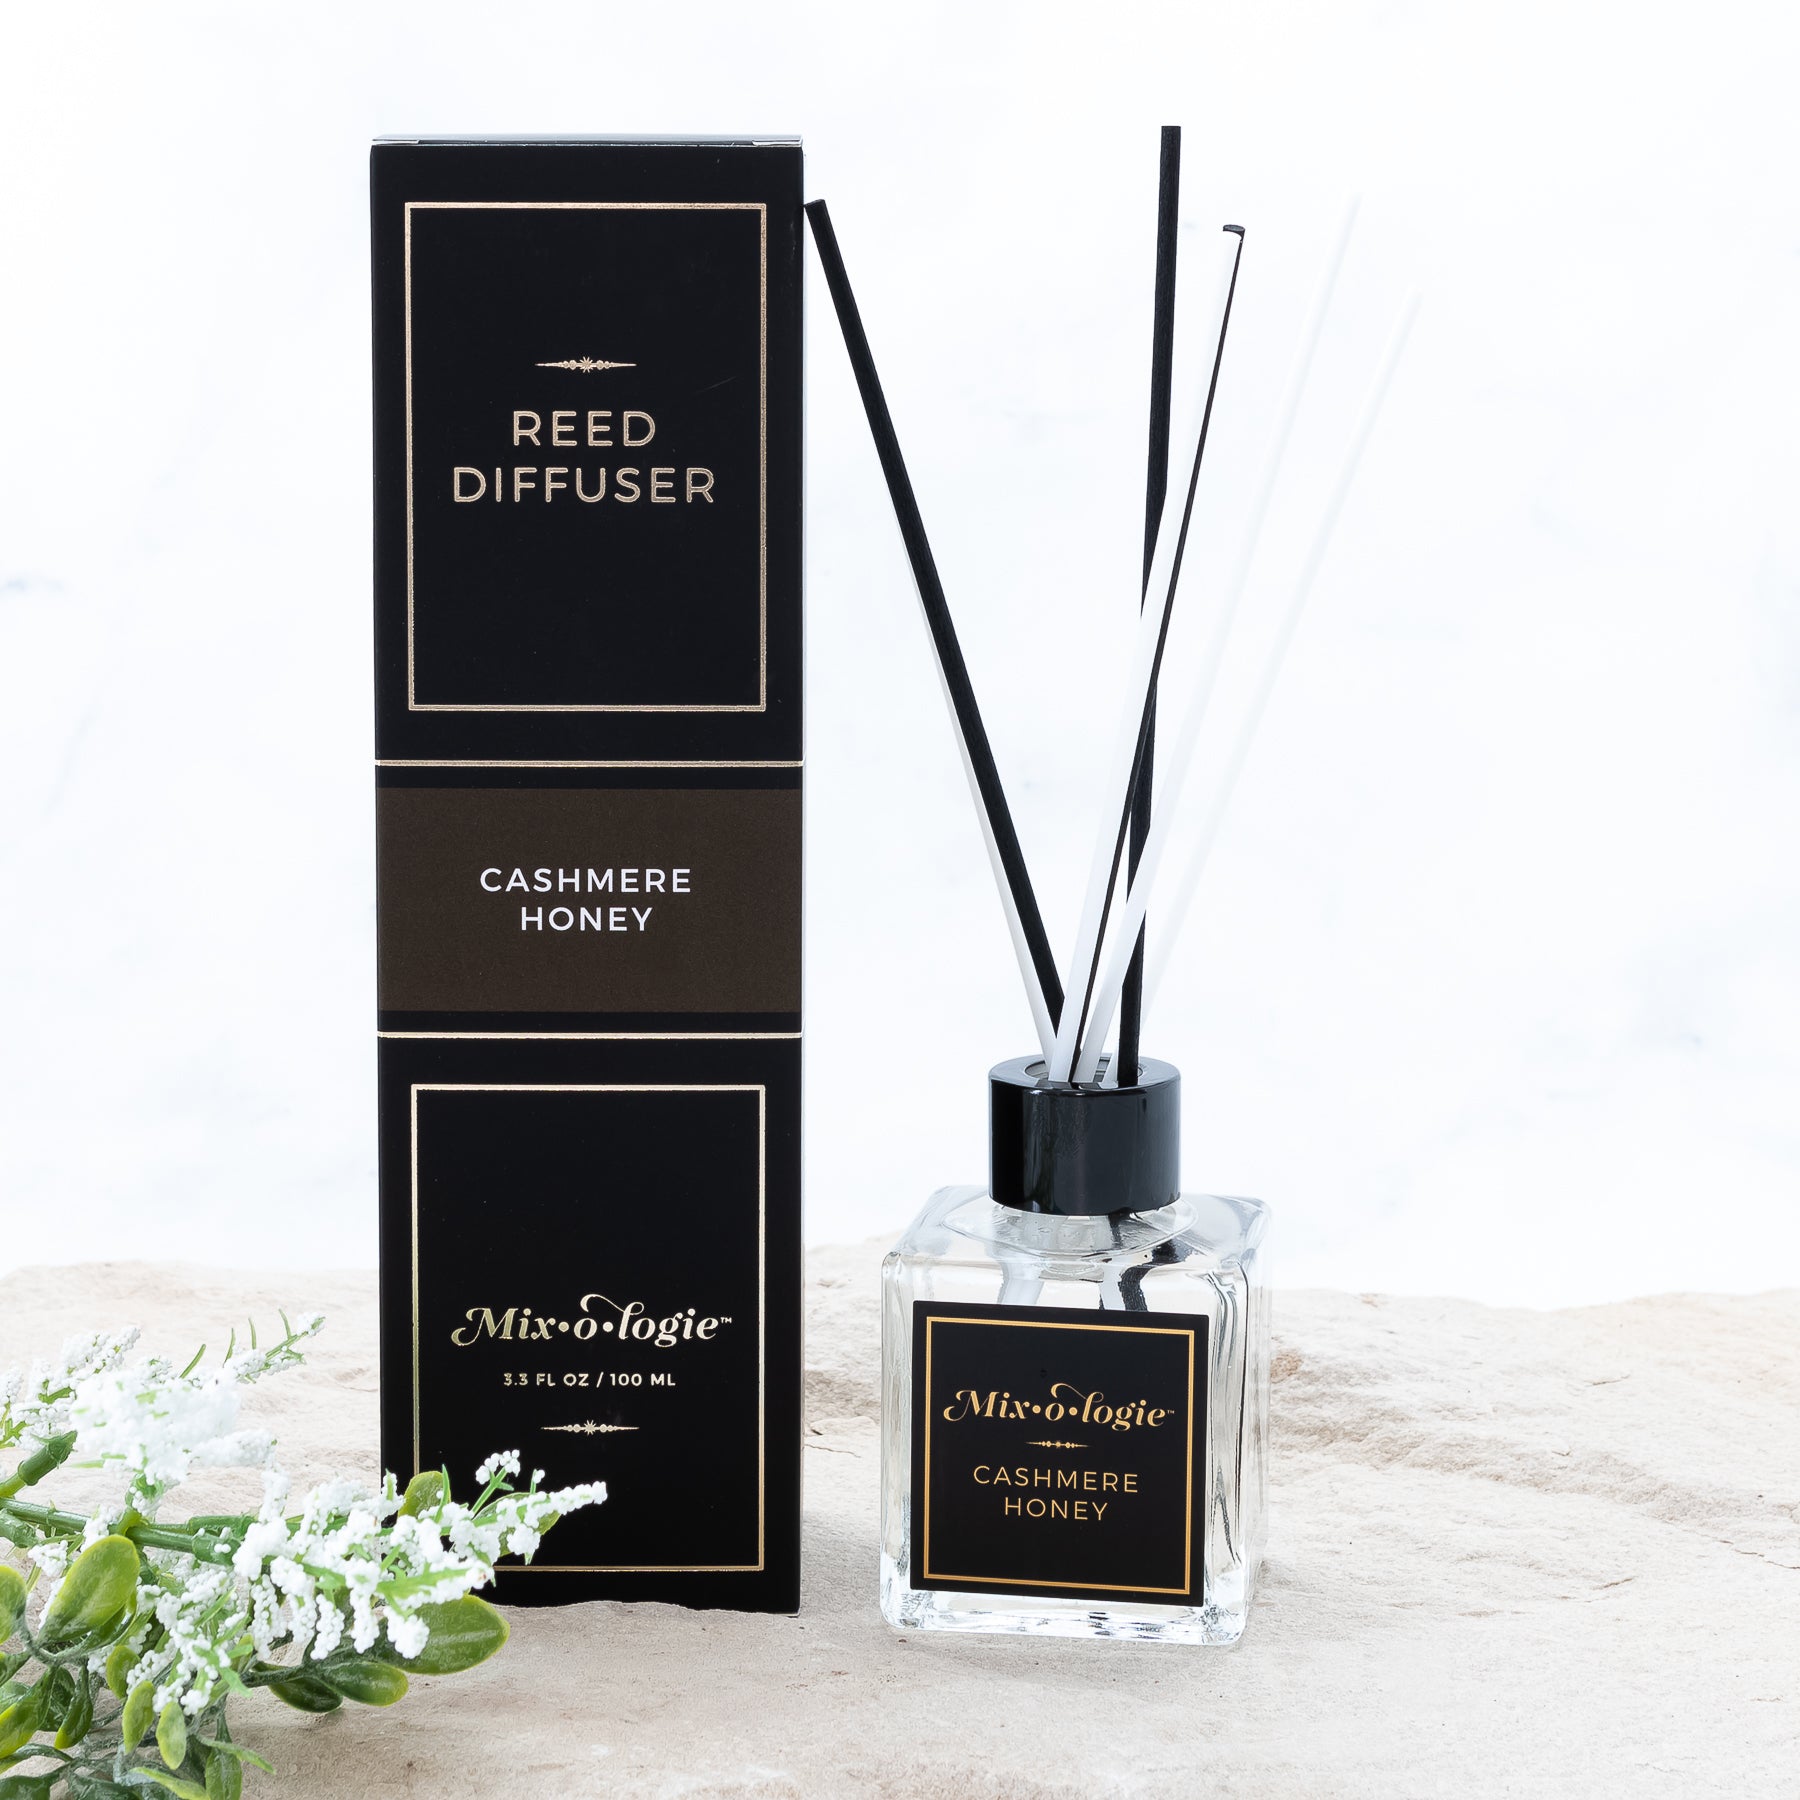 Cashmere Honey Reed Diffuser is a clear square glass container with black label that says Mixologie – Cashmere Honey. Has a black top and 4 white & 4 black reed sticks coming out of top, is 3.3 fl oz or 100 mL of clear scented liquid. Black rectangle package box with brown label. Box and diffuser are pictured with sand and greenery with white flowers.